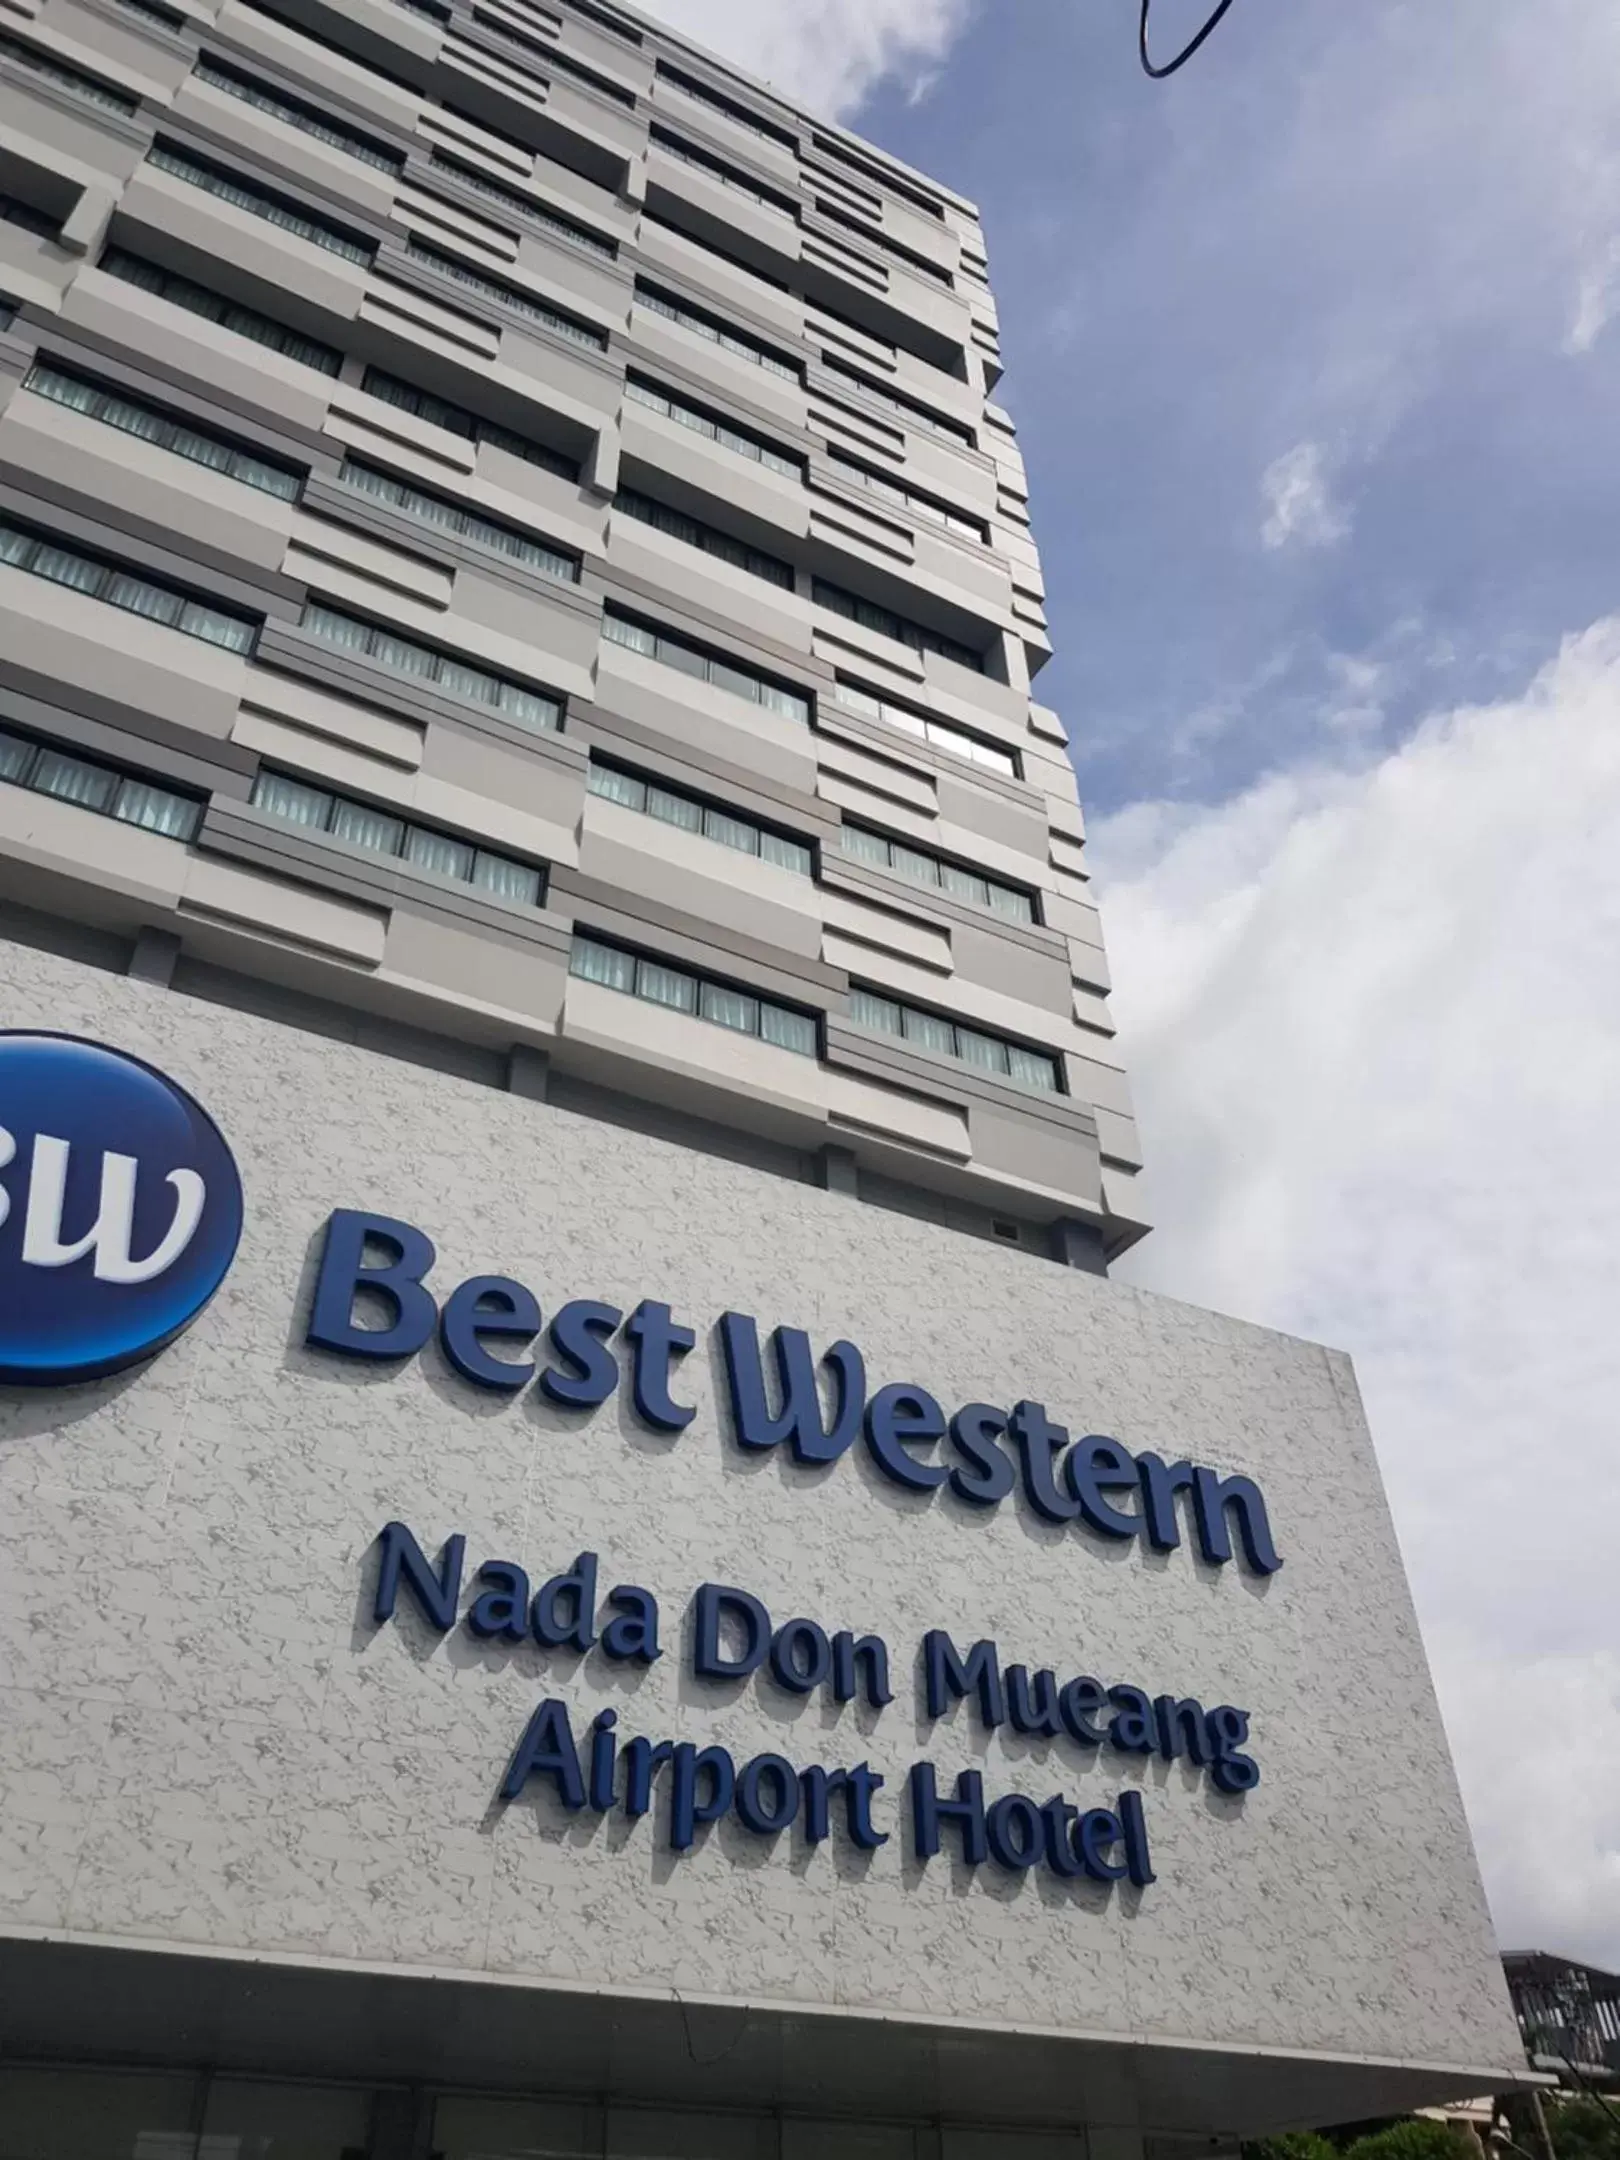 Logo/Certificate/Sign, Property Building in Best Western Nada Don Mueang Airport hotel